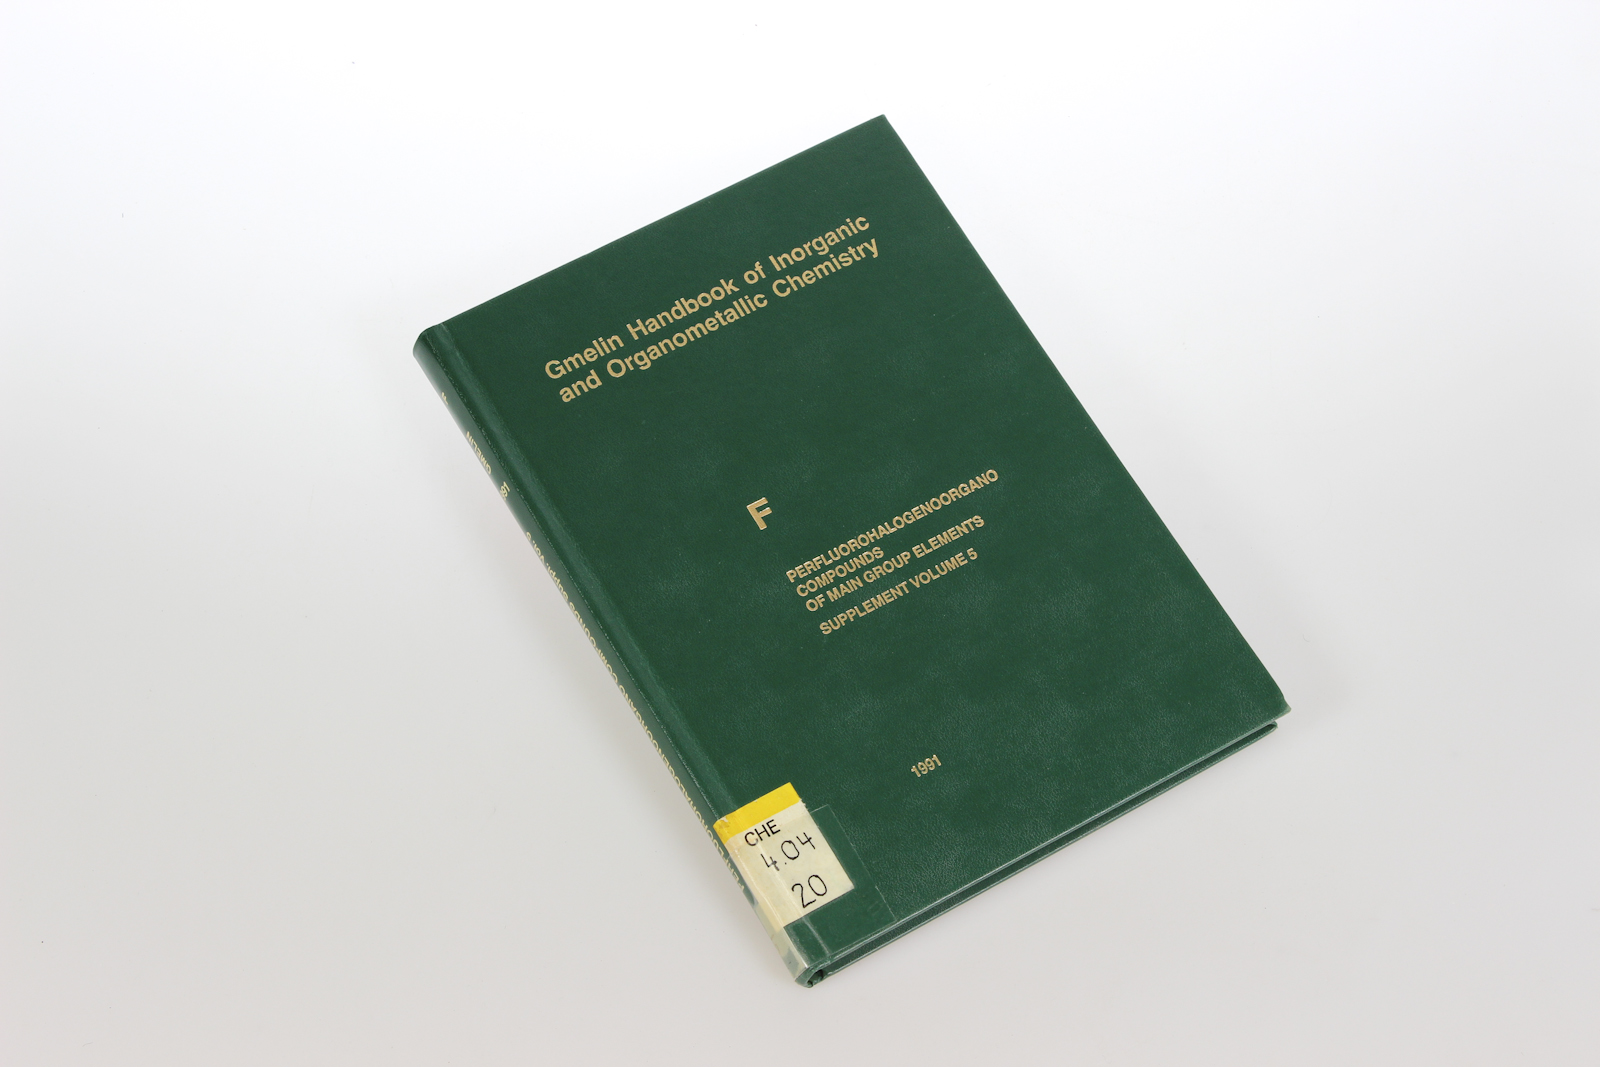 Gmelin Handbook of Inorganic and Organometallic Chemistry. System Number 5: F Perfluorohalogenoorgano Compounds of Main Group Elements. Supplement Volume 5: Aliphatic and Aromatic Compounds of Nitrogen.  8th ed. - Gmelin-Institut für Anorg. Chemie der Max-Planck-Gesellschaft zur Förderung d. Wissensch. (Hg)